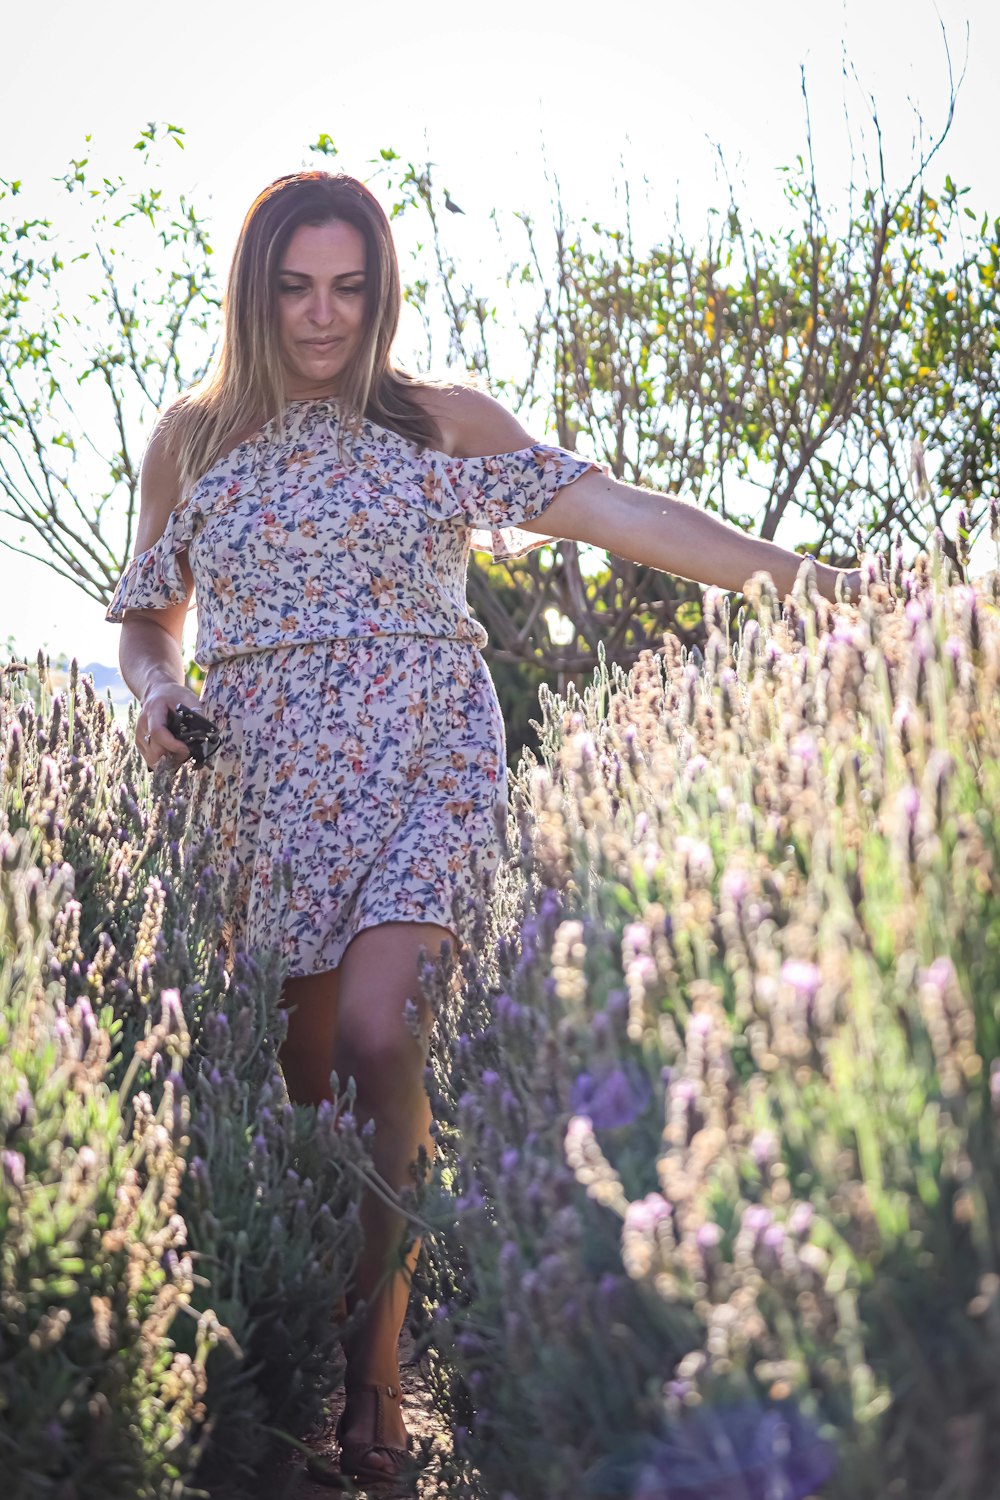 a woman walking through a field of lavender flowers